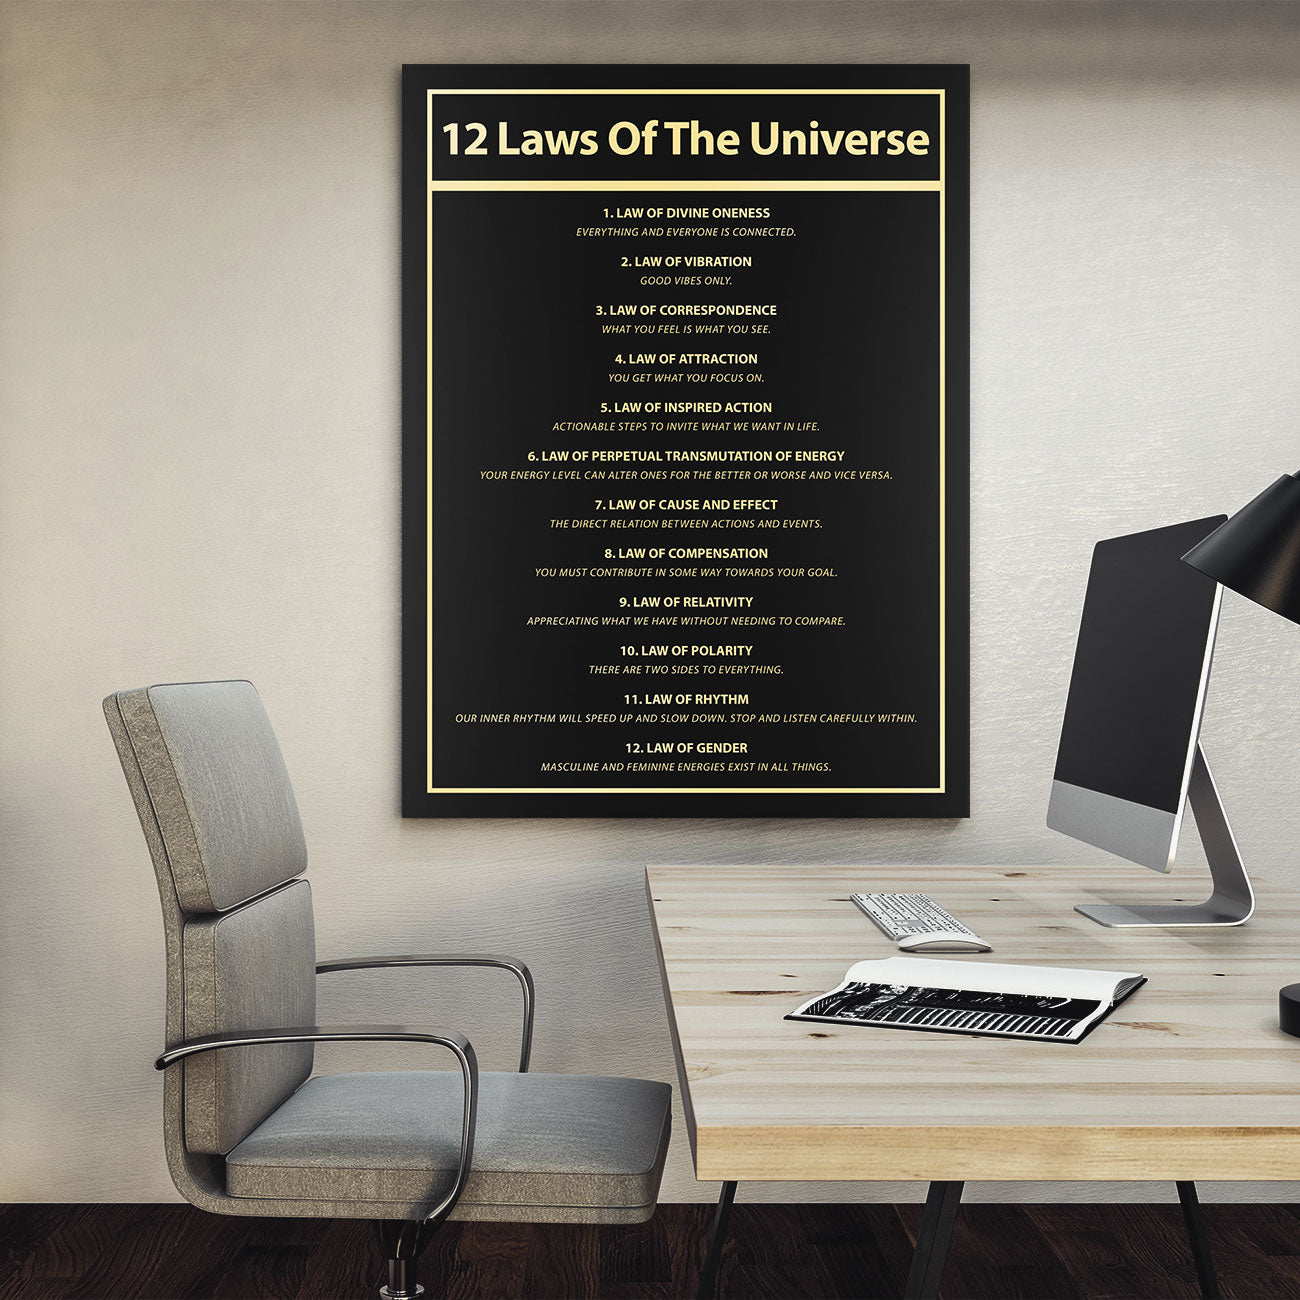 12 Laws Of The Universe